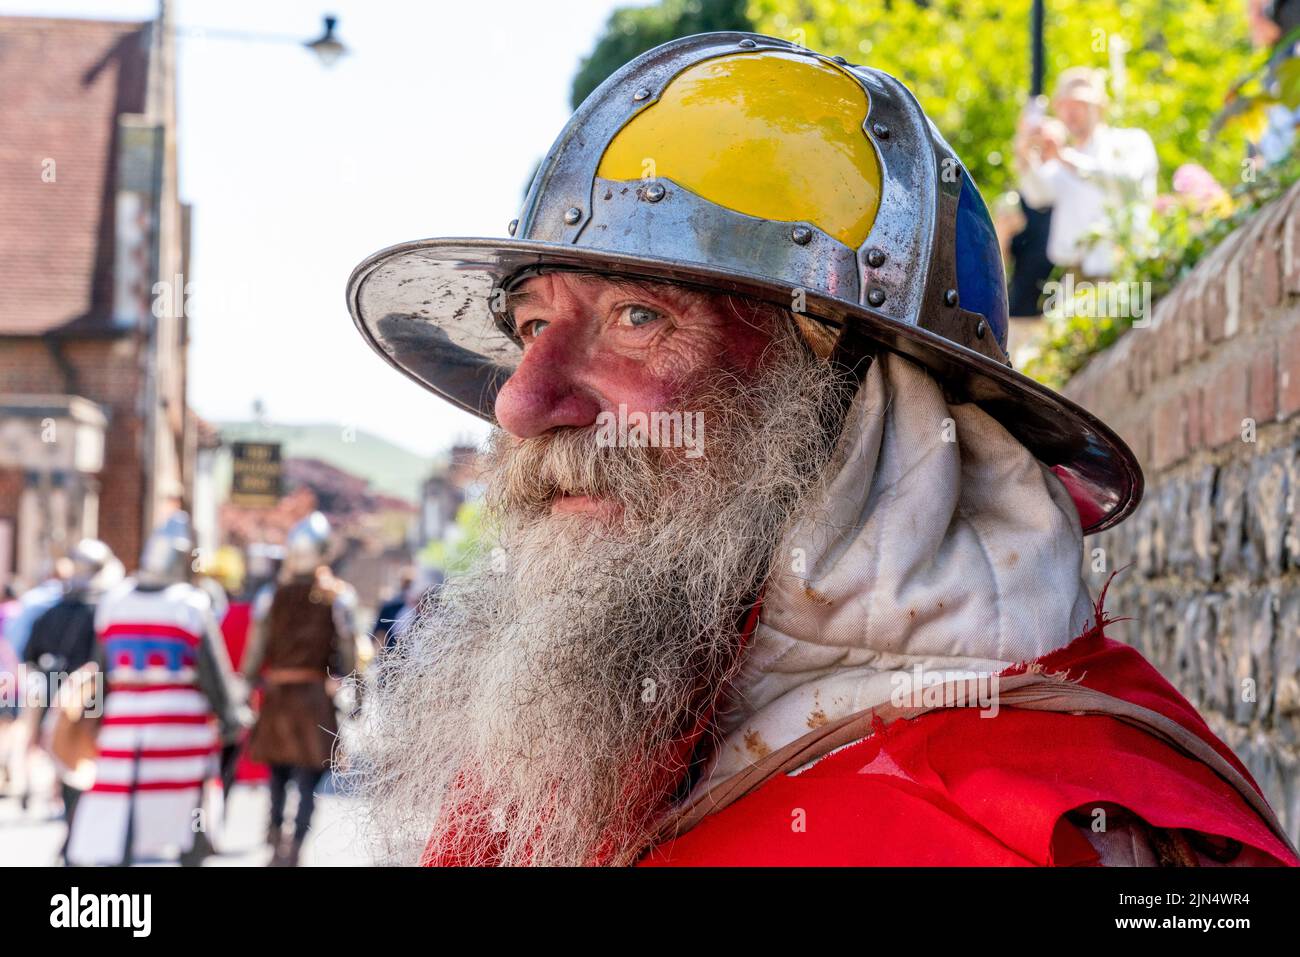 A Man Dressed In Medieval Costume Prepares To Take Part In A Re-Enactment Of The Battle Of Lewes , Lewes, East Sussex, UK Stock Photo